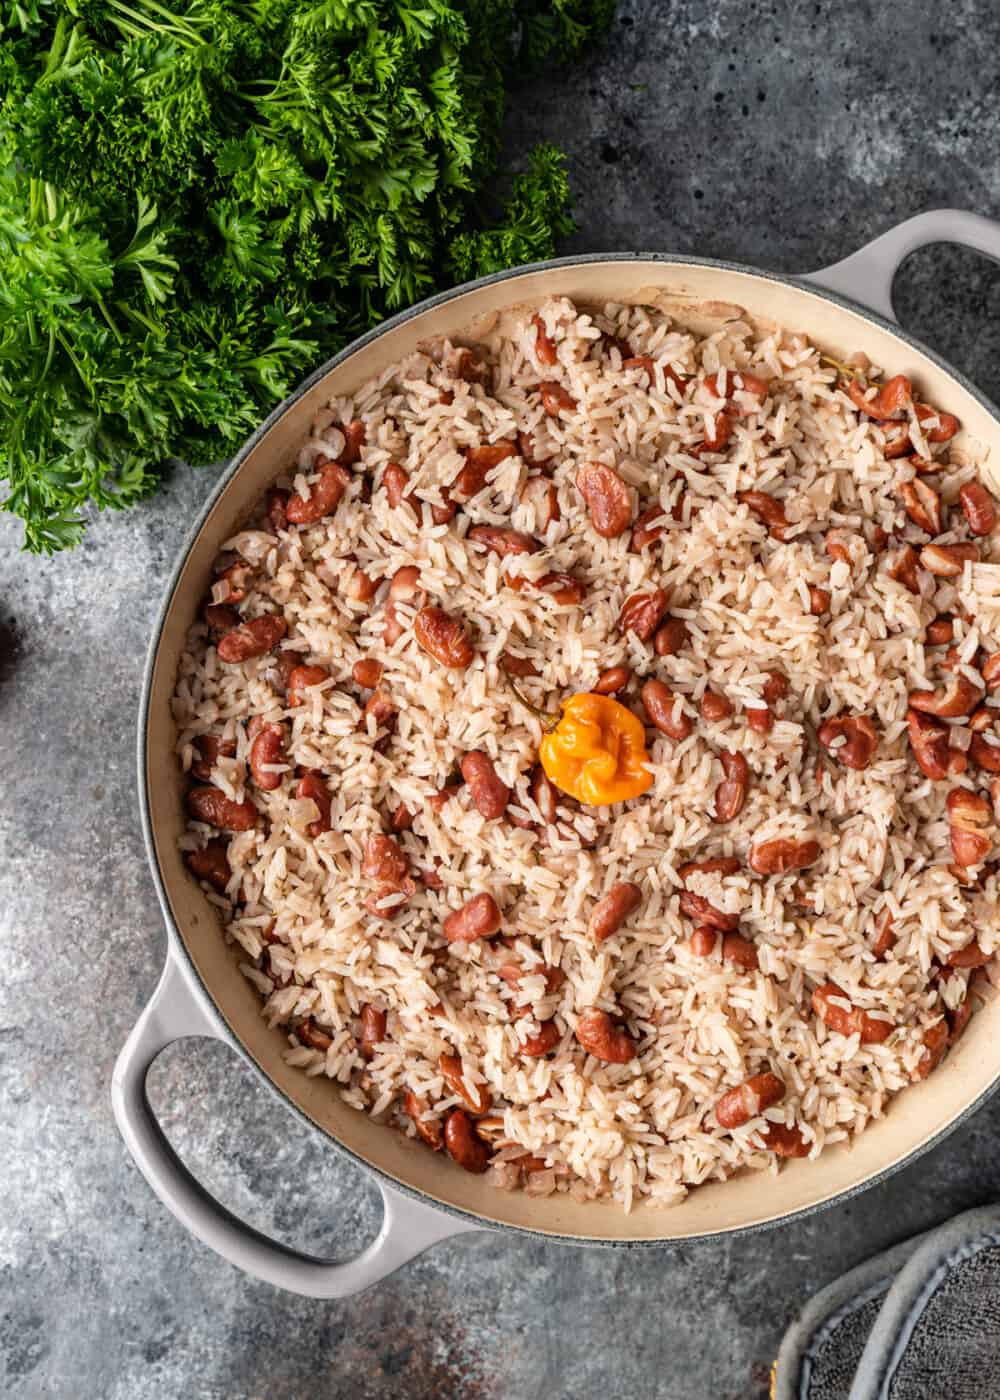 overhead image: large skillet of cooked beans and rice